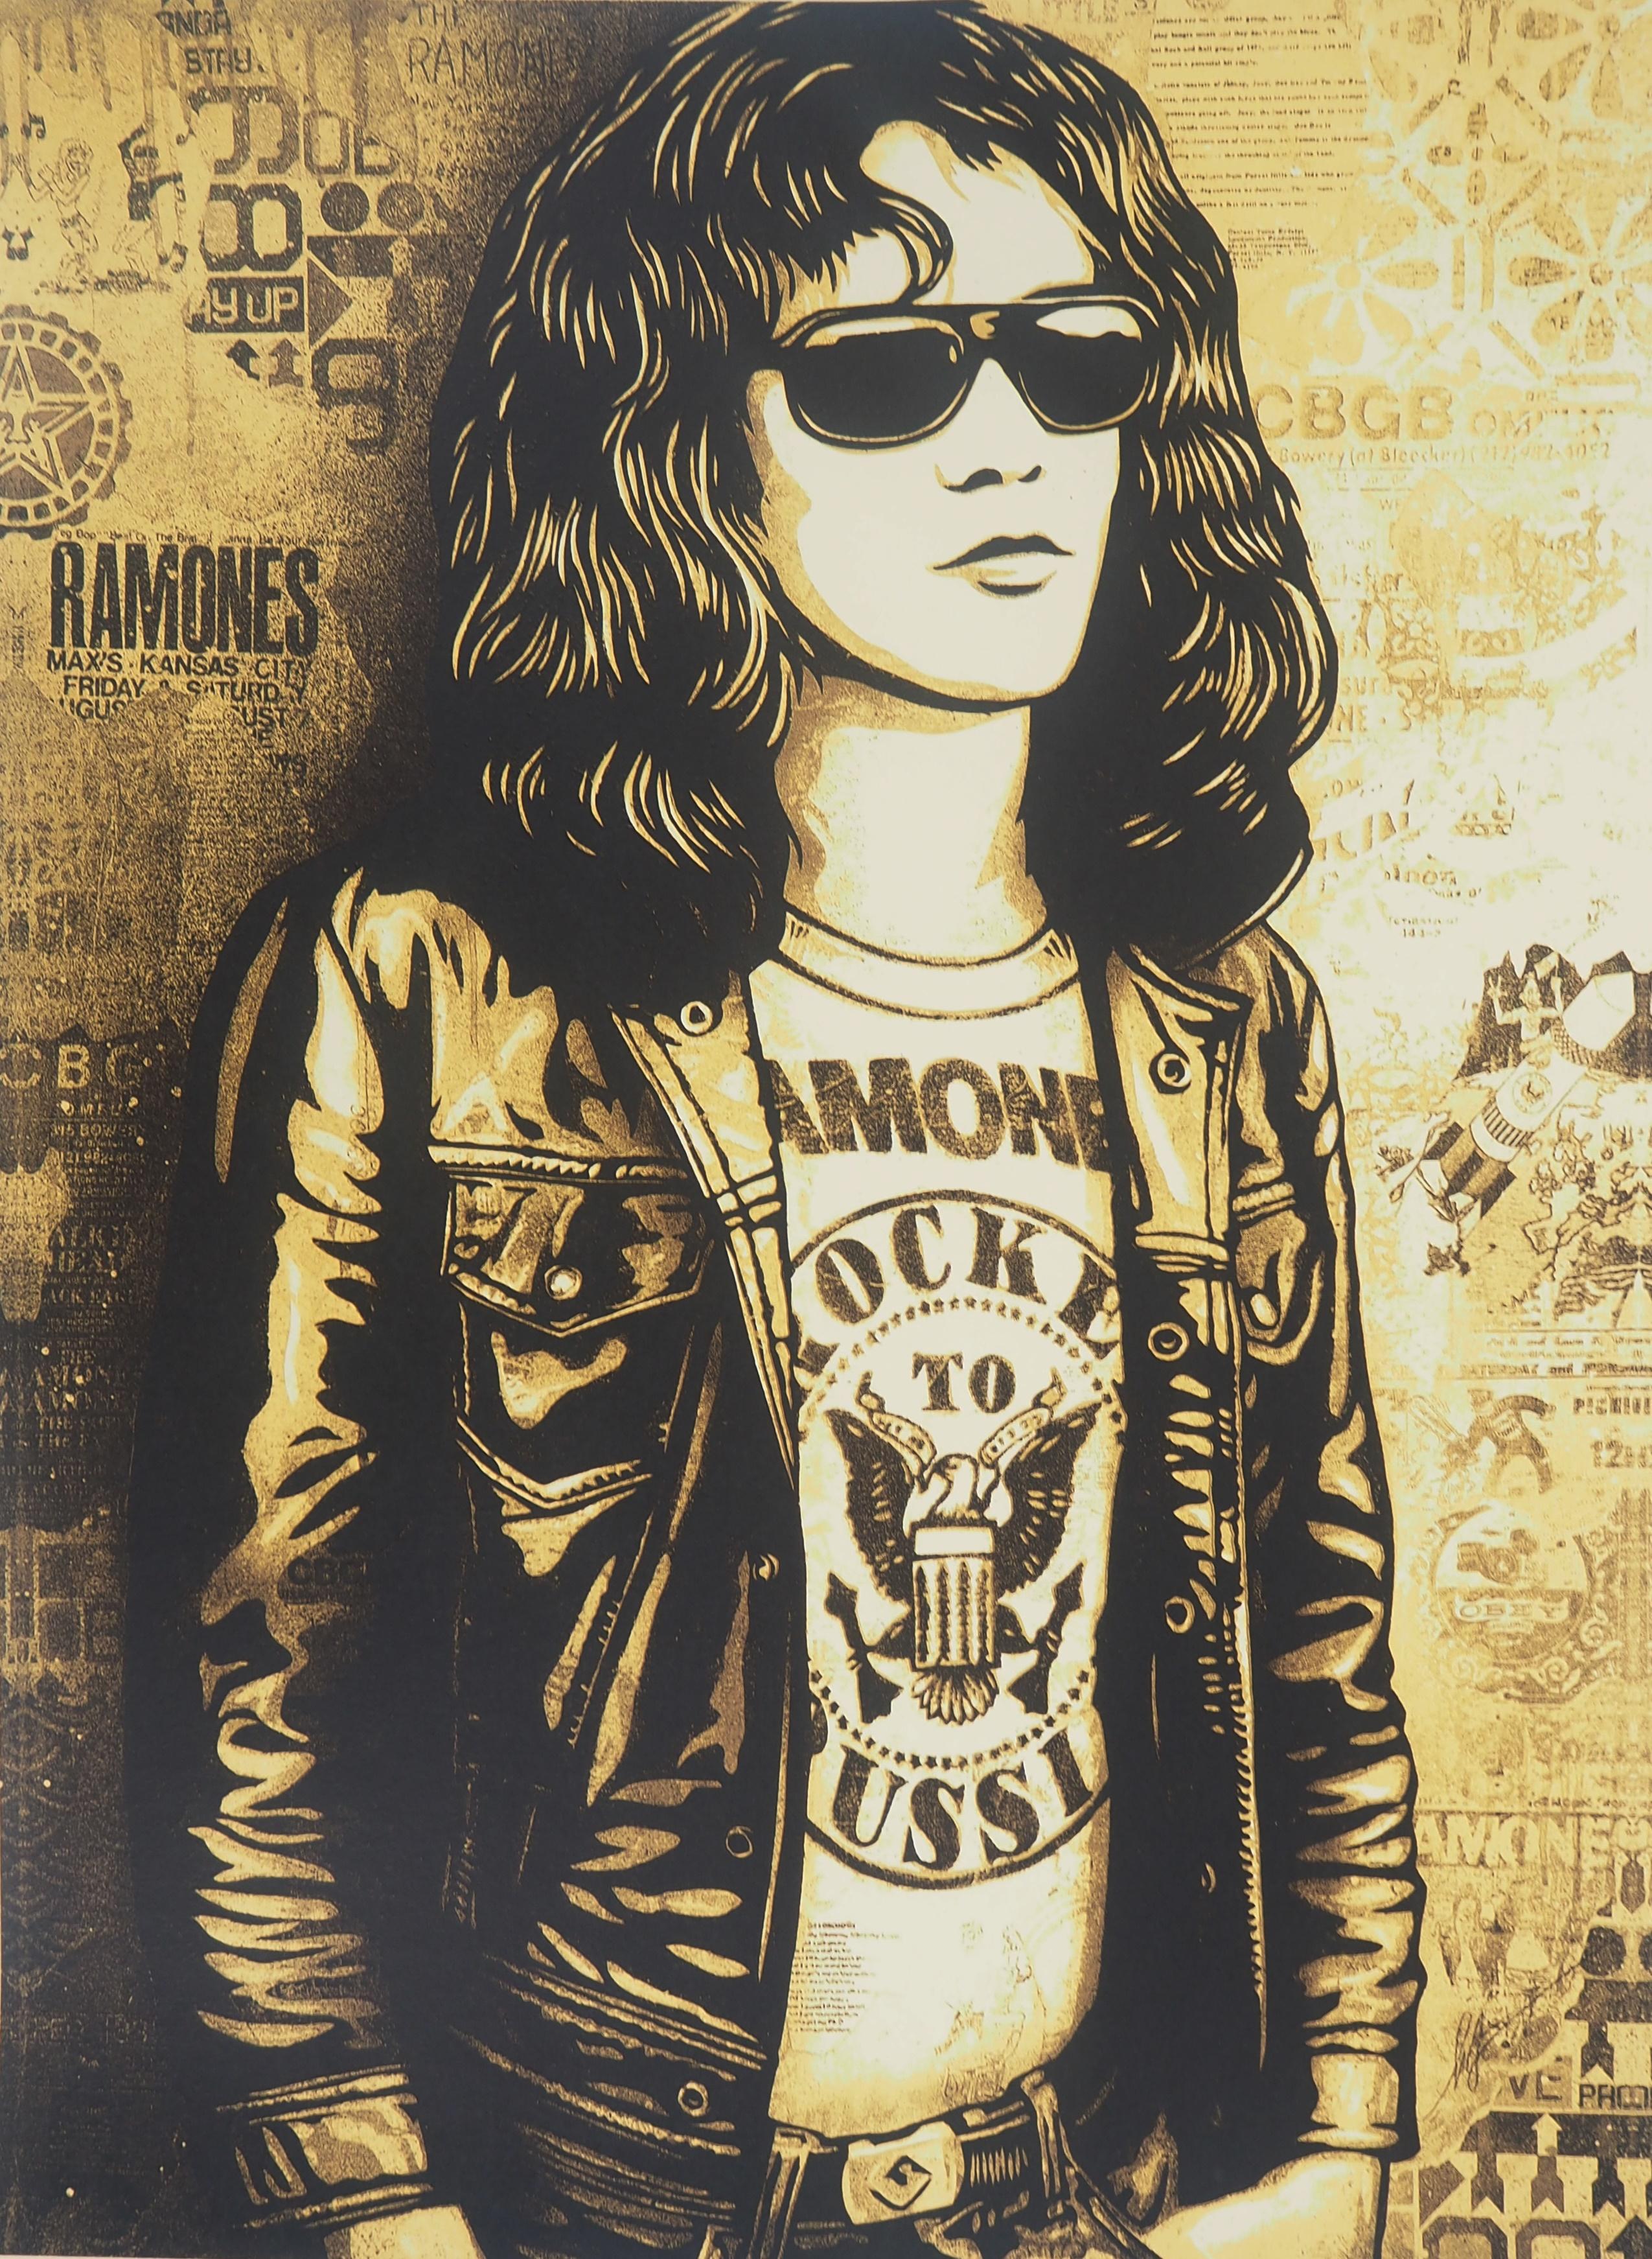 Tommy Ramone Collage (Gold) - Original Handsigned Screen Print - Beige Figurative Print by Shepard Fairey